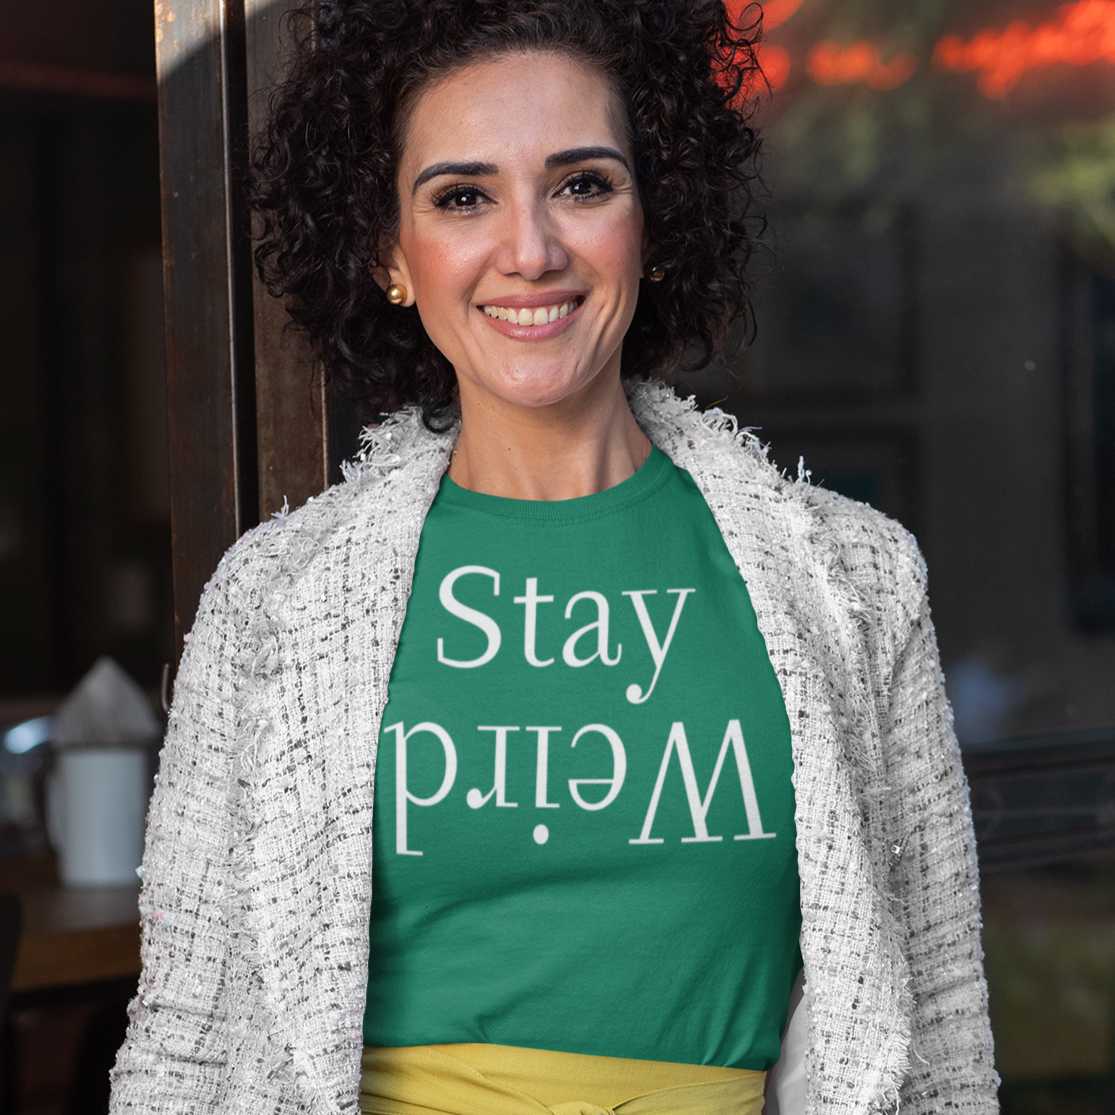 stay-weird-heather-kelly-t-shirt-unisex-mockup-featuring-a-middle-aged-woman-with-curly-hair-by-a-restaurant-window